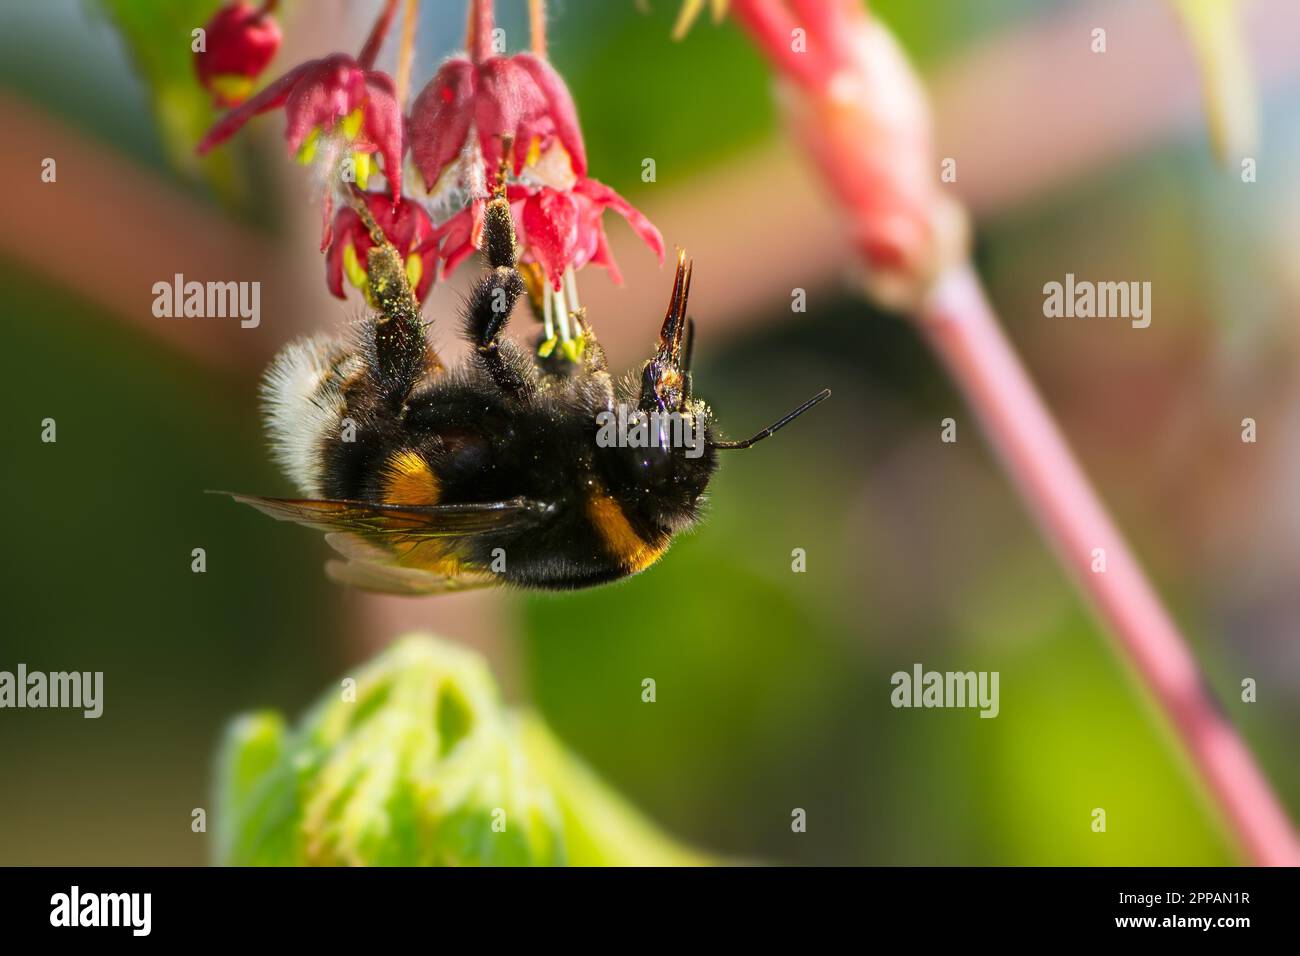 Macro of a Northern white-tailed bumblebee (Bombus magnus) at the blossoms of a japanese maple tree Stock Photo